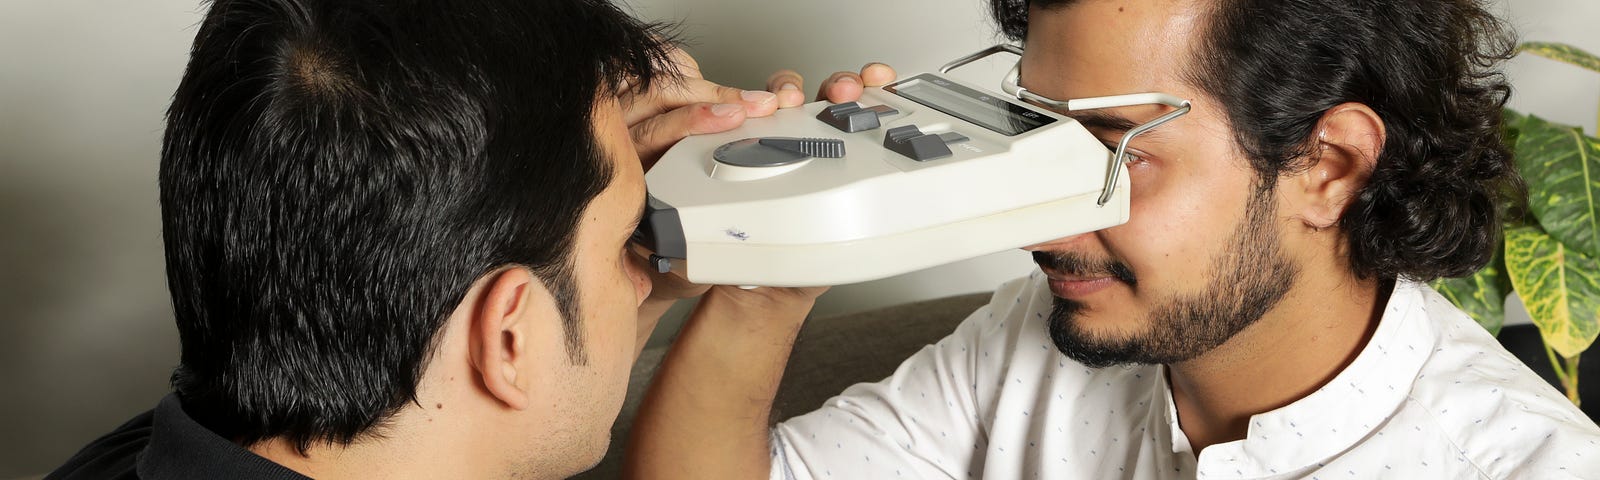 Man getting an eye test done with equipment